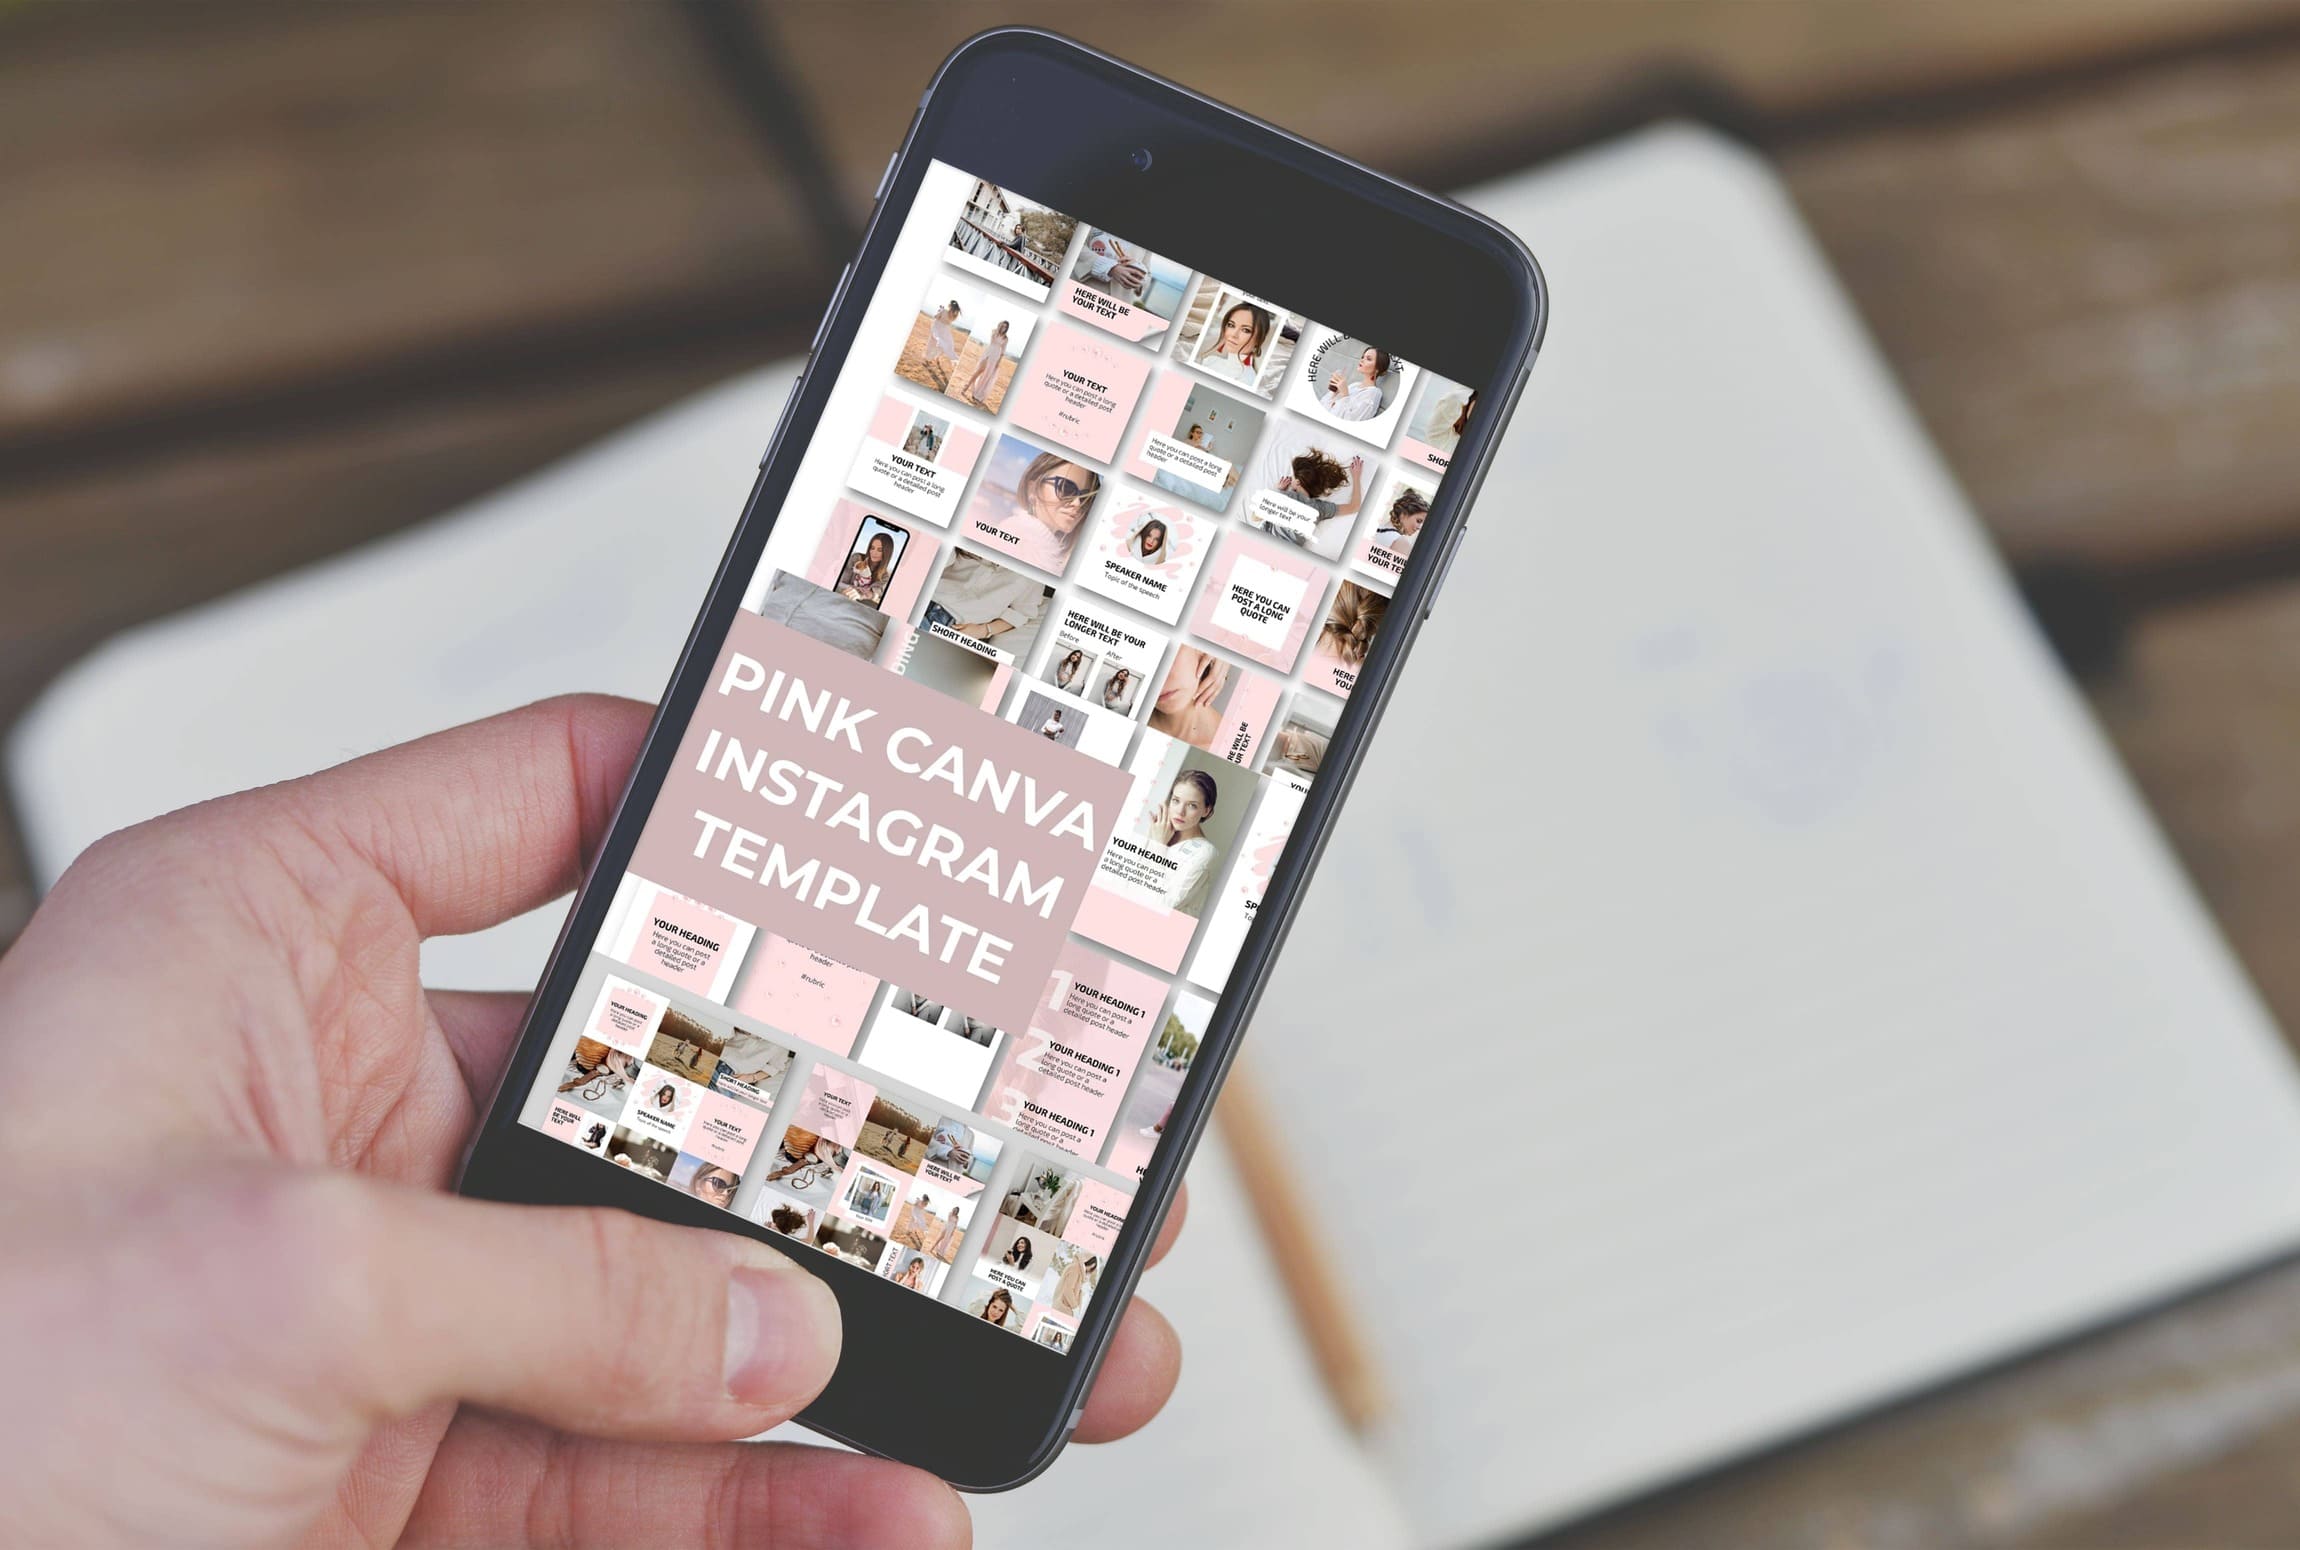 Pink CANVA Instagram Template In The Smartphone.